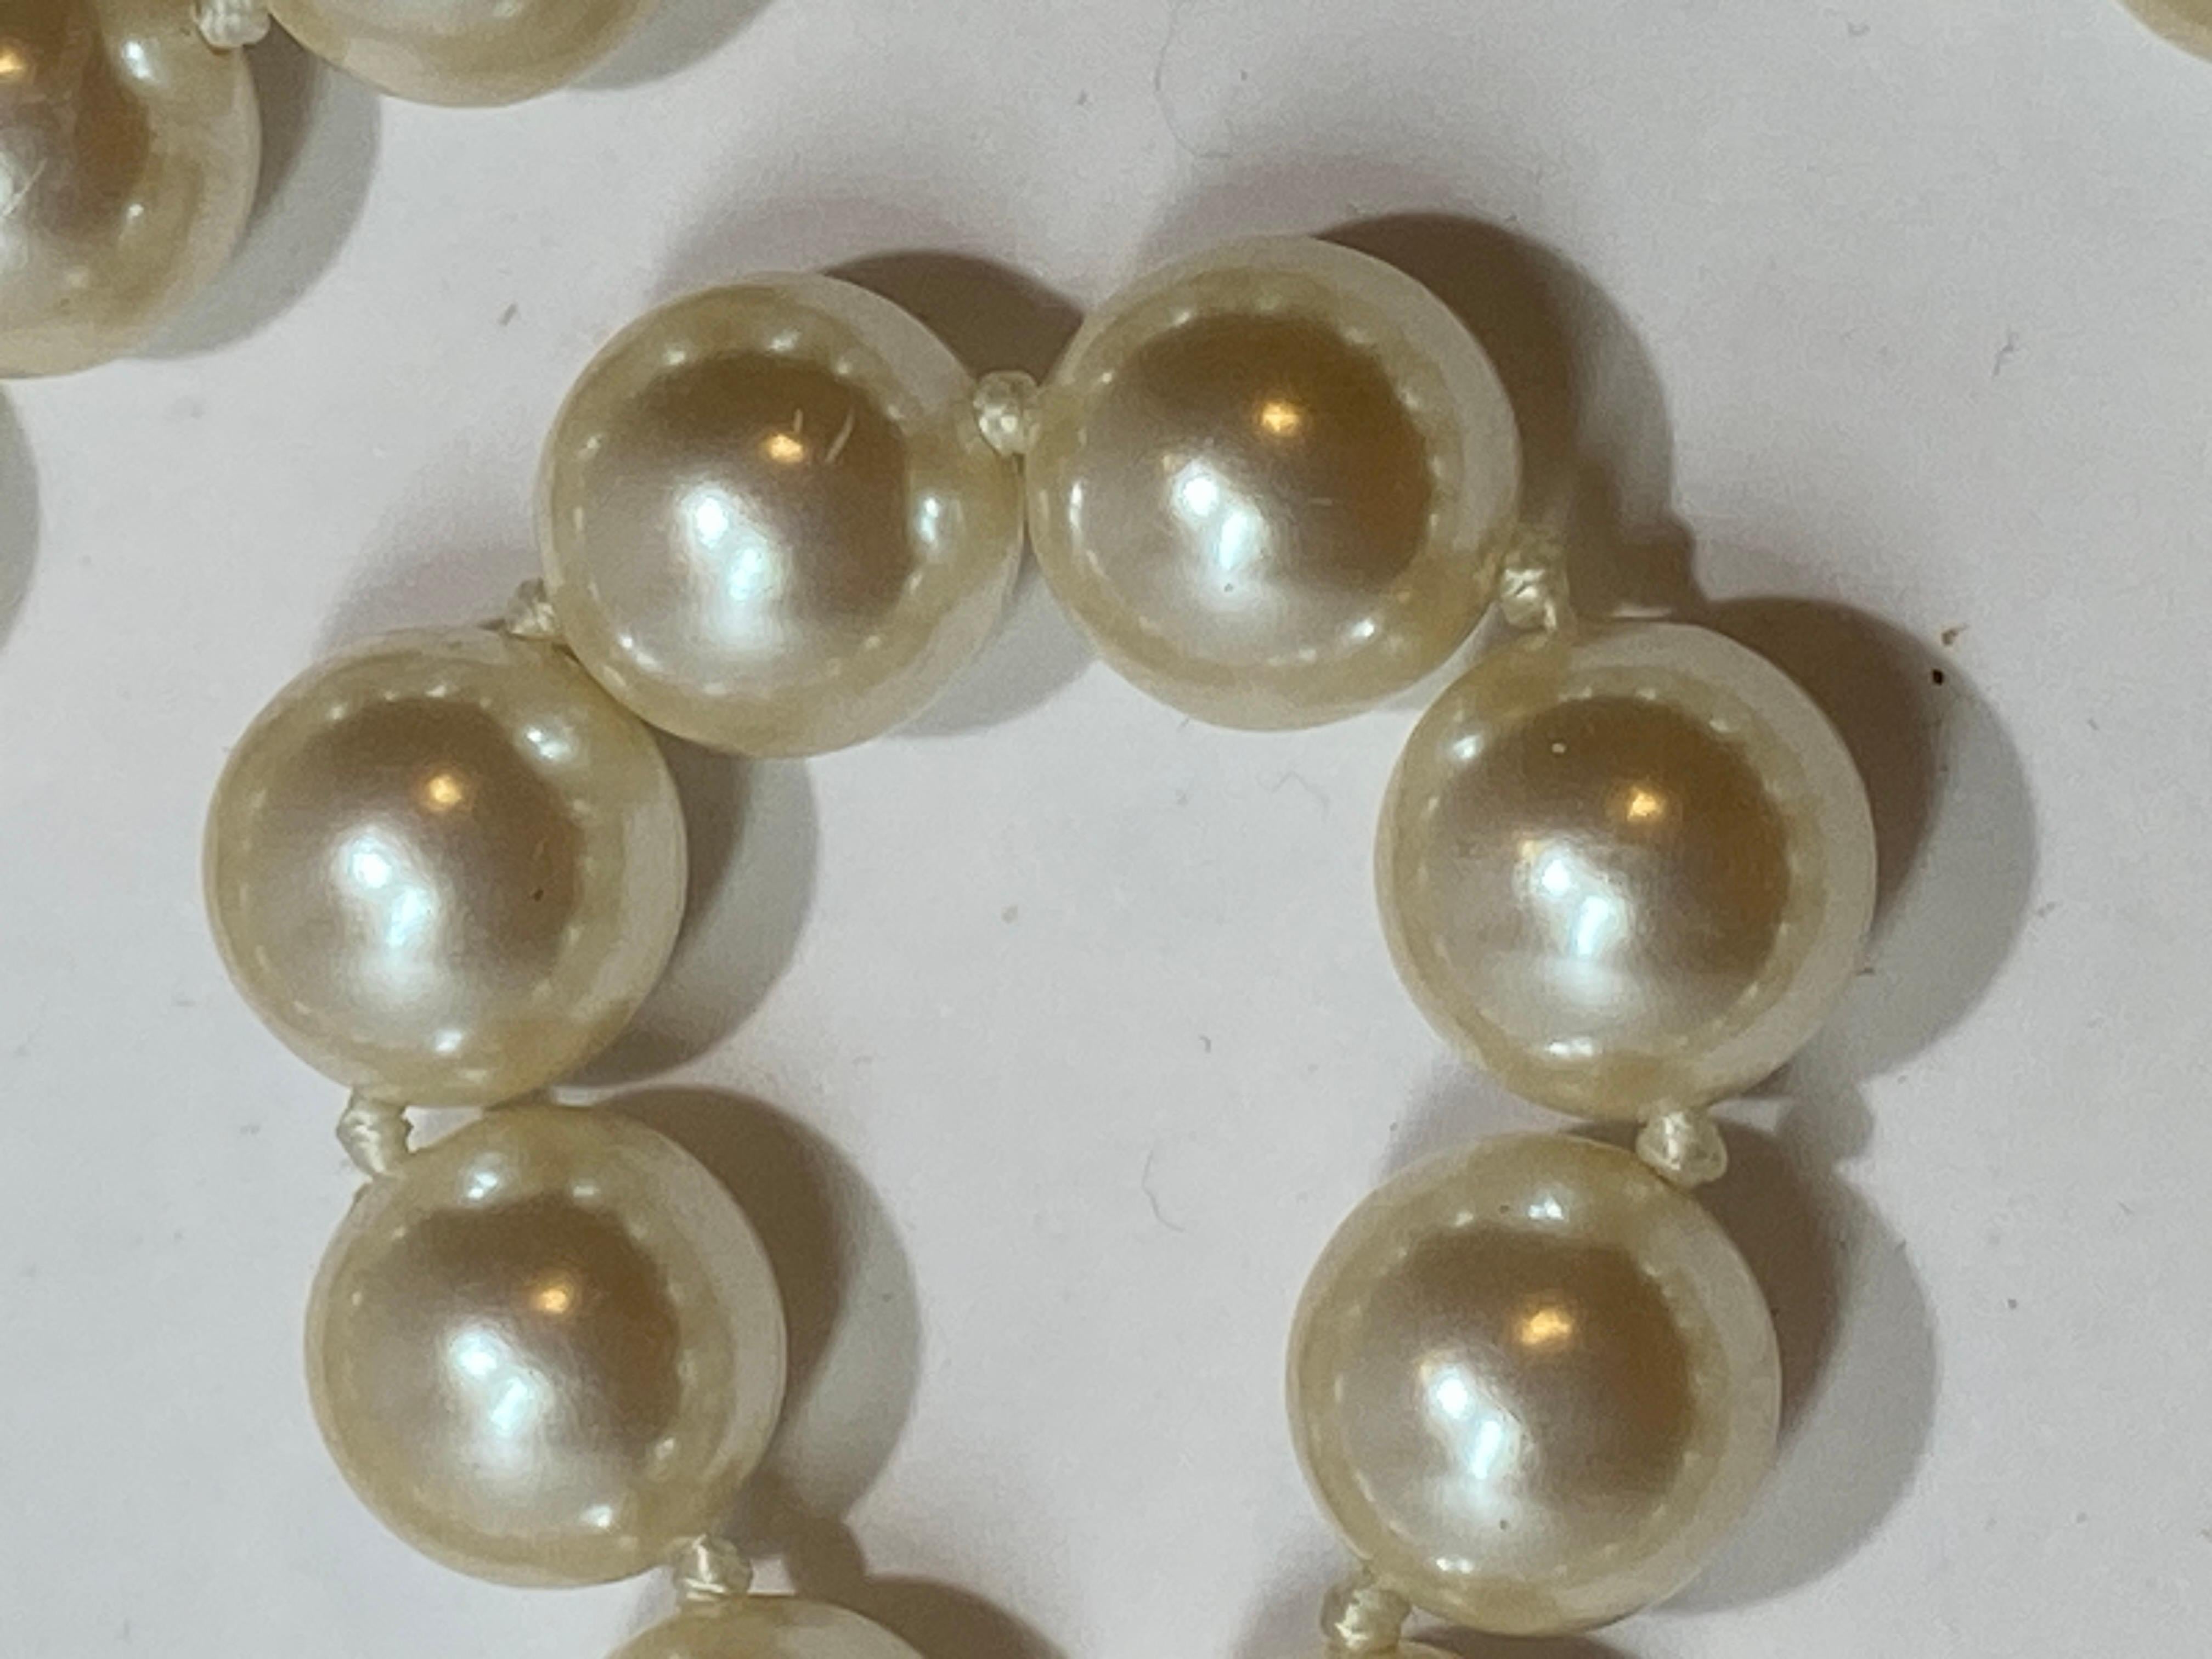 This wonderfully extra-long hand-knotted elegant Chanel-like costume pearl necklace measures 71 inches in length. The circumference of the pearls measures 1/2 inch. Made in France.